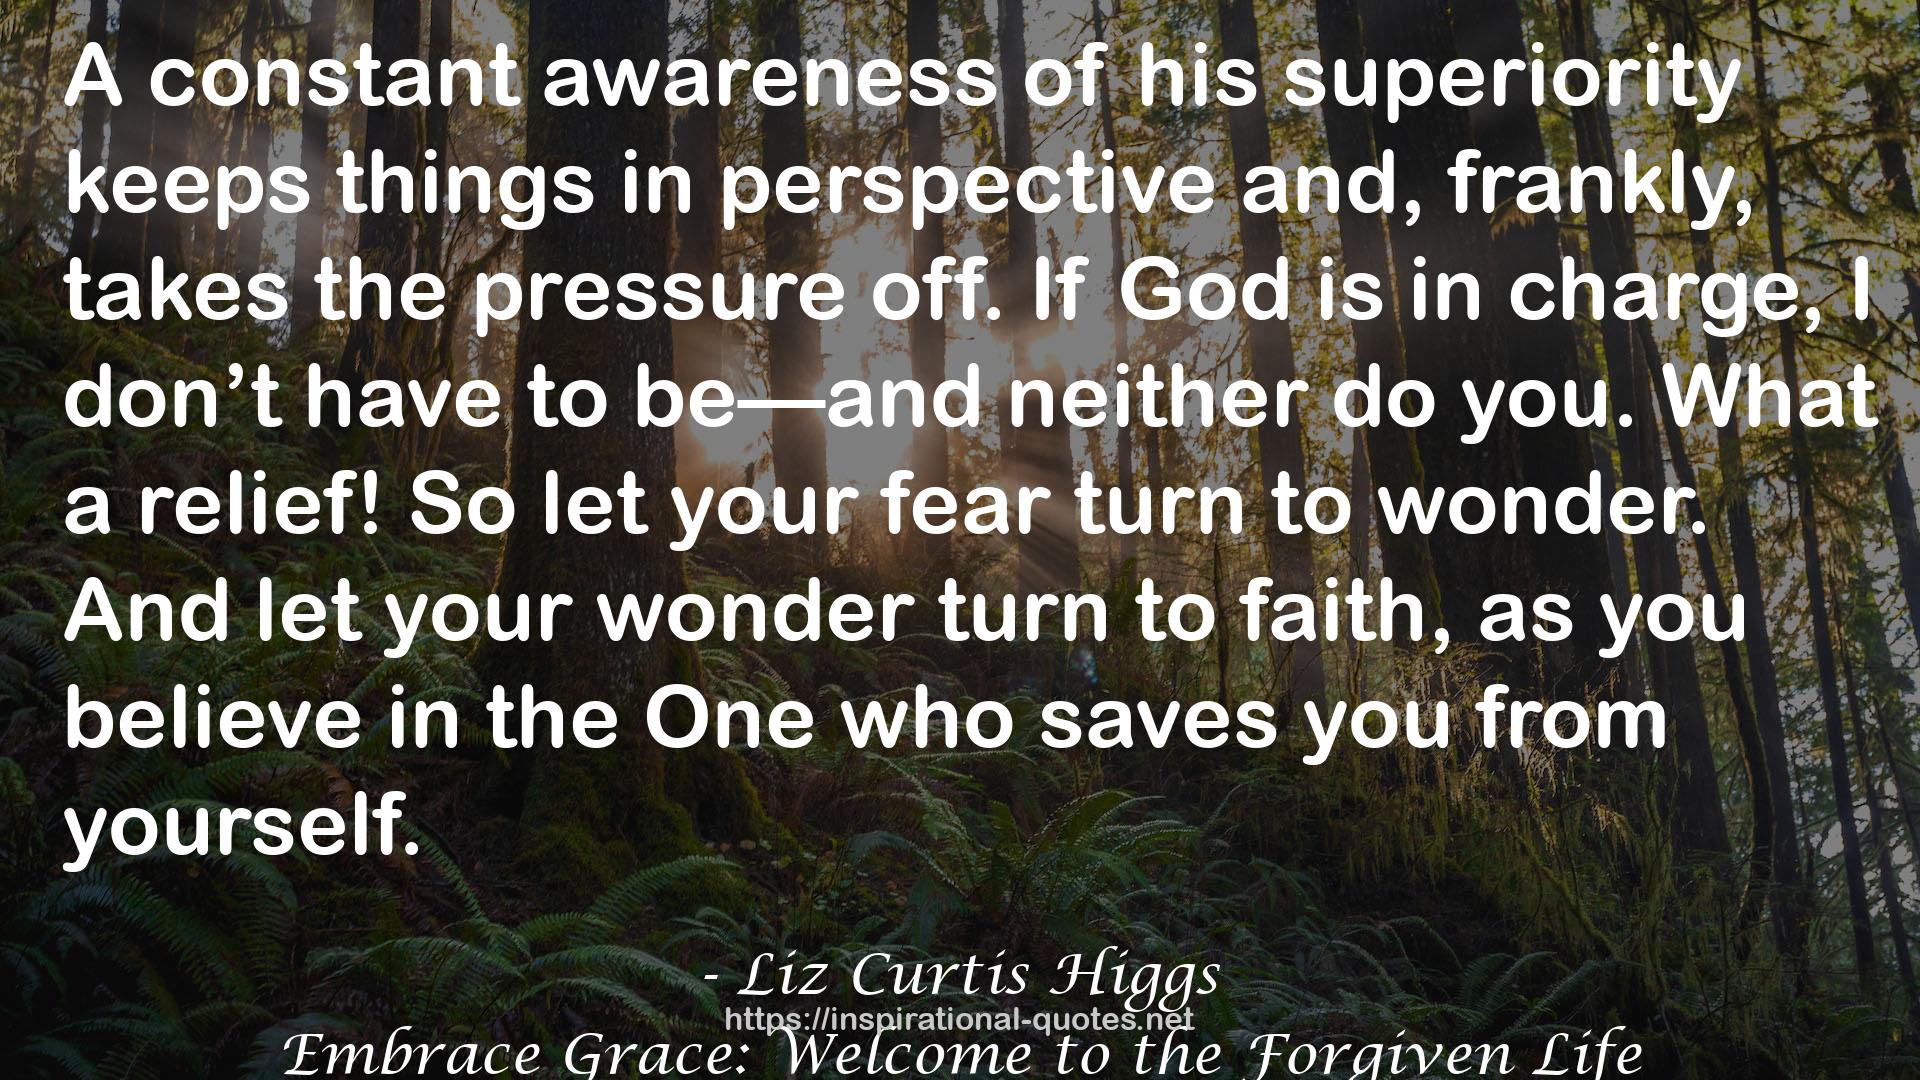 Embrace Grace: Welcome to the Forgiven Life QUOTES